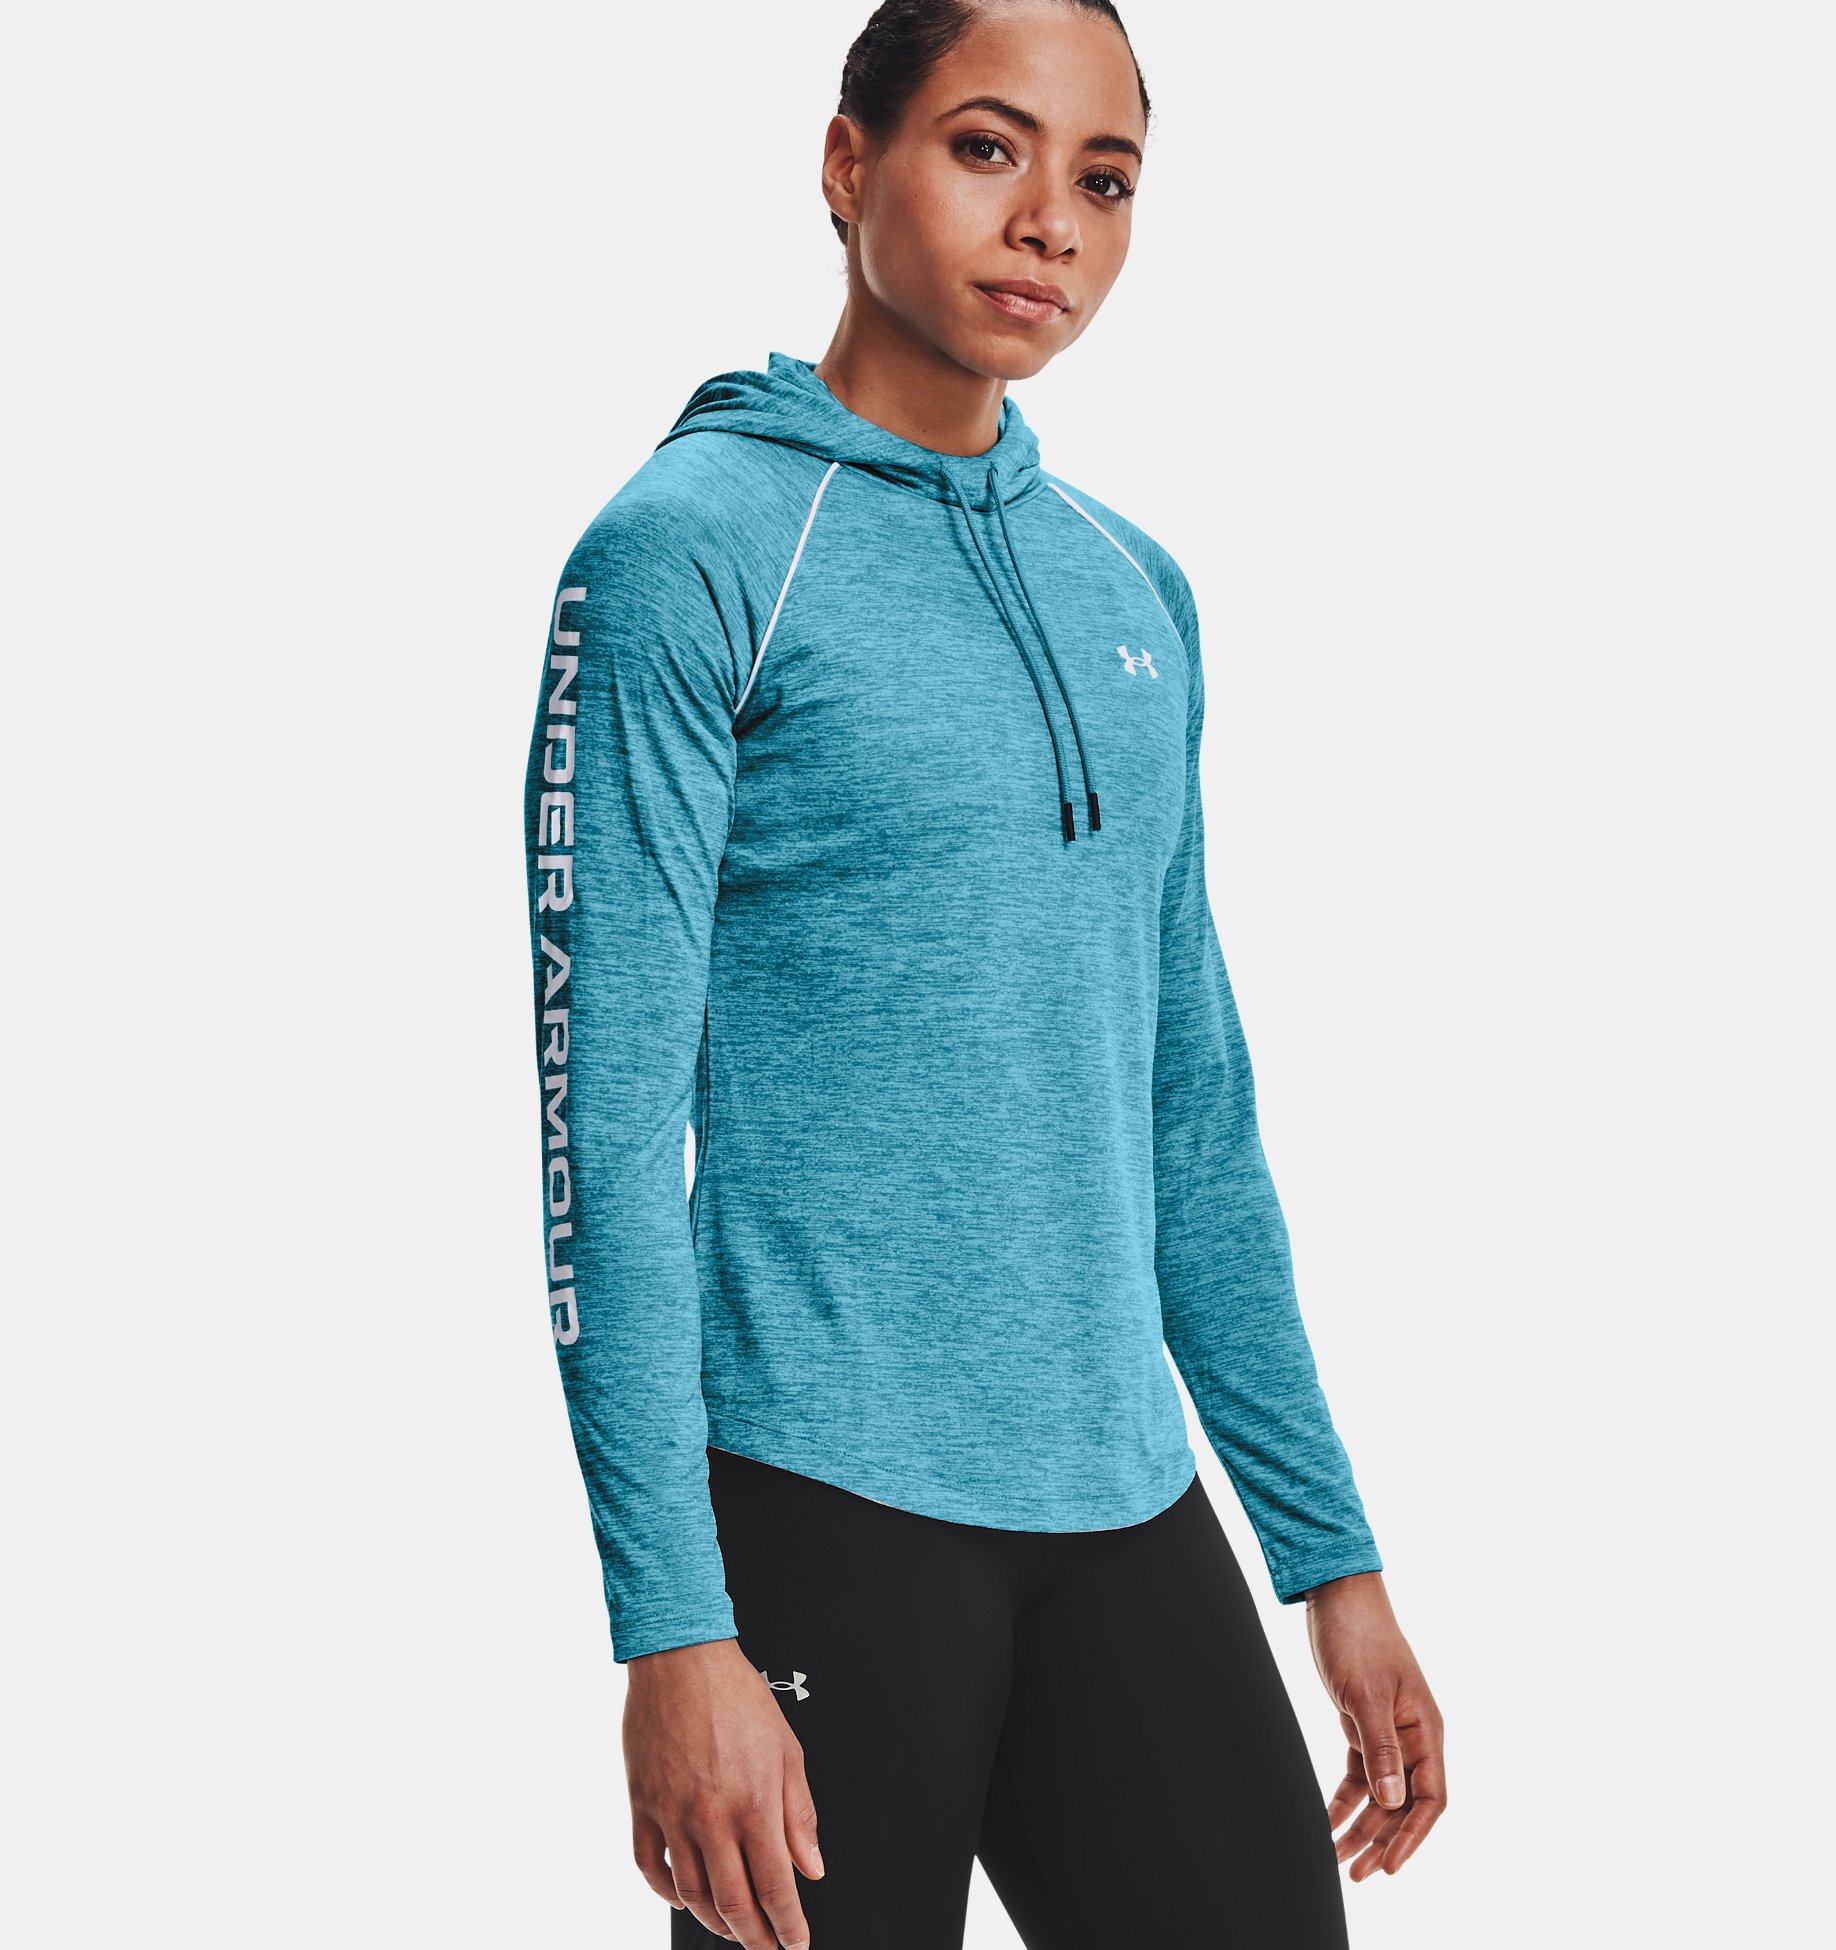 https://underarmour.scene7.com/is/image/Underarmour/V5-1362868-450_FC?rp=standard-0pad|pdpZoomDesktop&scl=0.72&fmt=jpg&qlt=85&resMode=sharp2&cache=on,on&bgc=f0f0f0&wid=1836&hei=1950&size=1500,1500